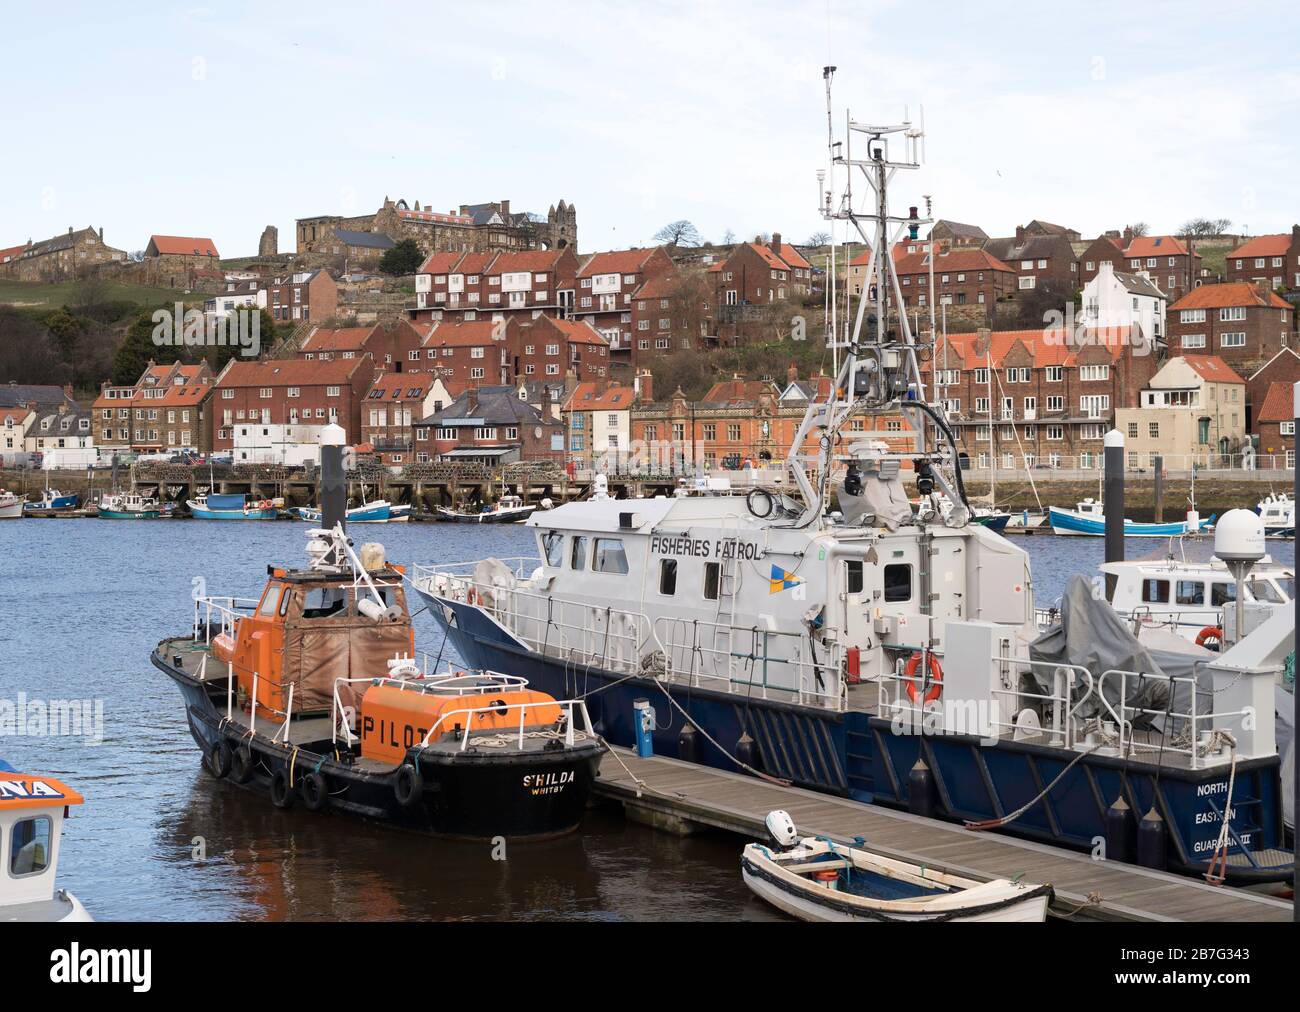 Fisheries Patrol vessel North Eastern Guardian III and pilot boat St Hilda moored in Whitby harbour, North Yorkshire, England, UK Stock Photo